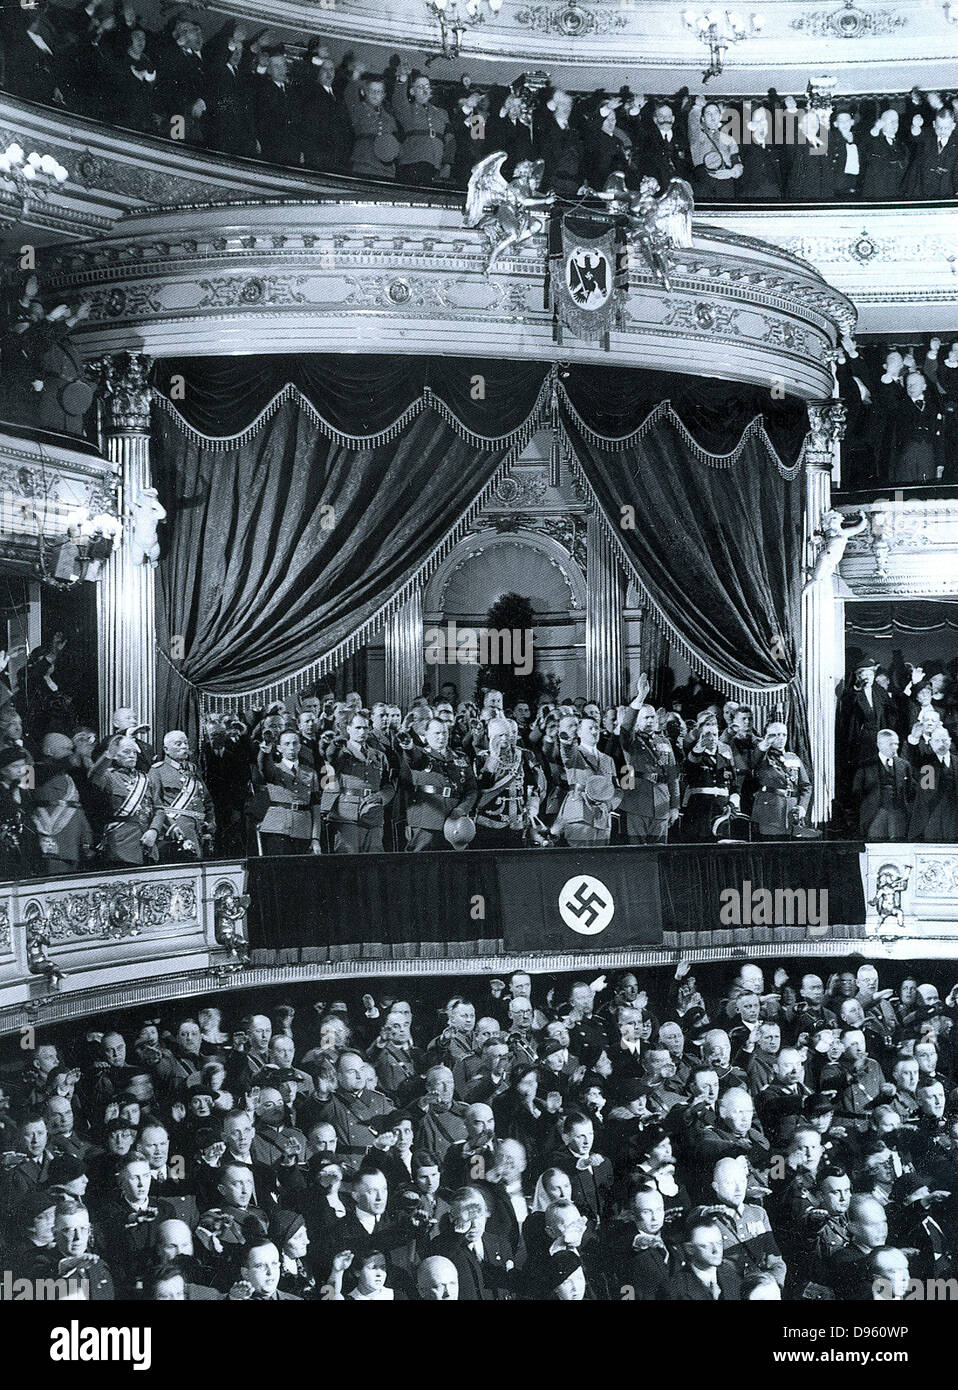 Chancellor Adolf Hitler is greeted by an audience in a theatre in Germany c1935. Key Nazi leaders attending are seen in the State Official Box. Left to right: Josef Goebbels, Rudolf Hess, Herman Göring, Field Marshall Von Mackensen, Adolf Hitler, General Stock Photo